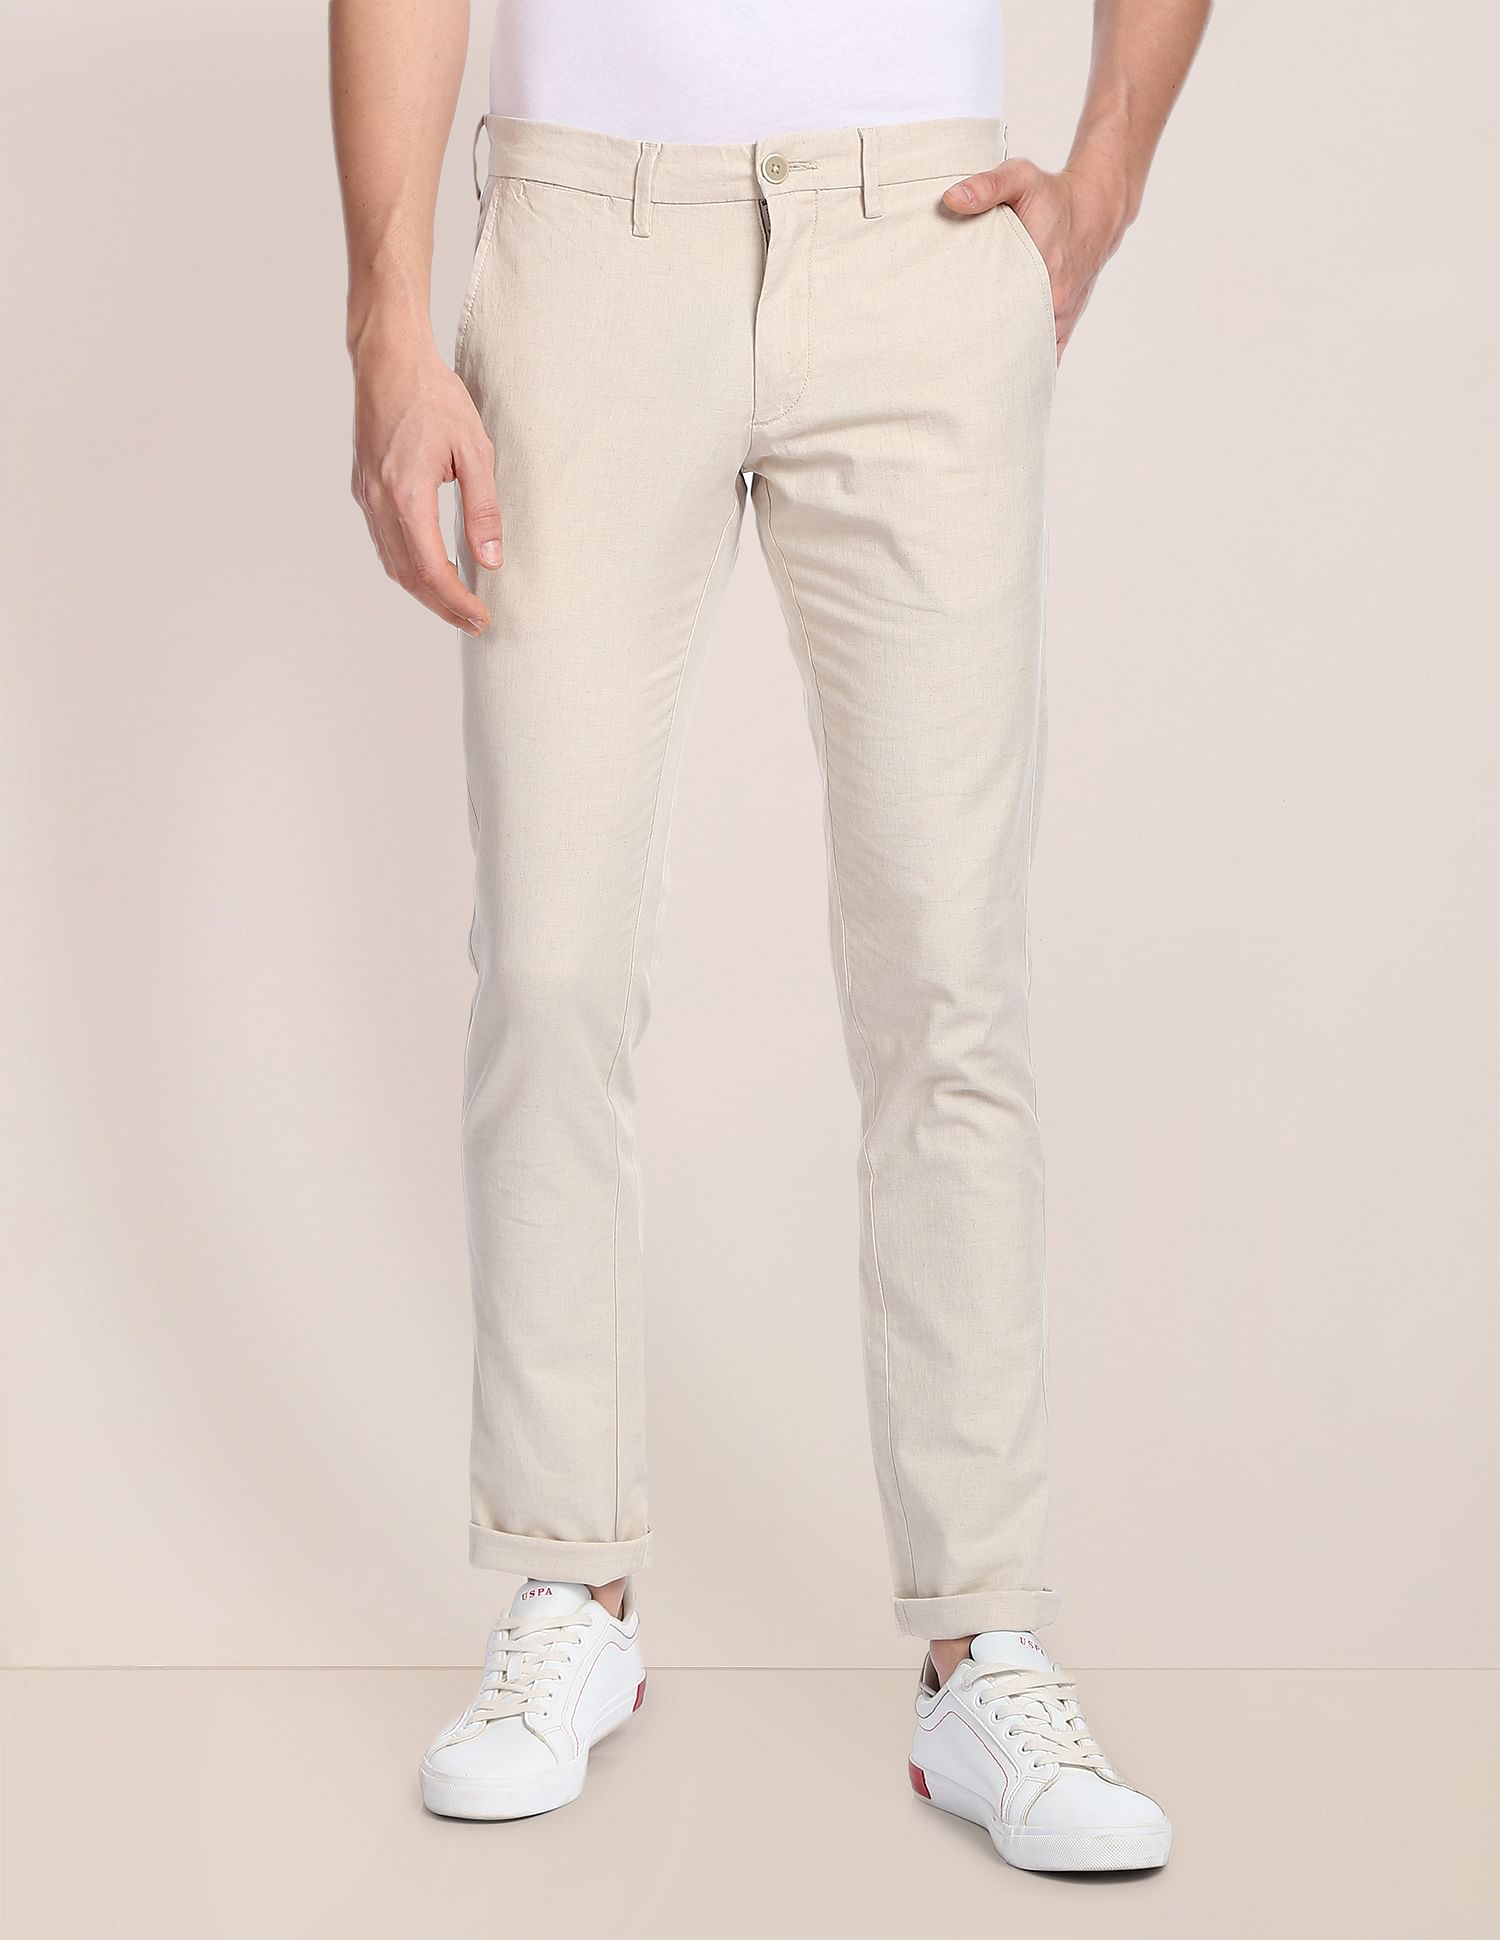 U.S. POLO ASSN. Slim Fit Boys Brown Trousers - Buy U.S. POLO ASSN. Slim Fit  Boys Brown Trousers Online at Best Prices in India | Flipkart.com